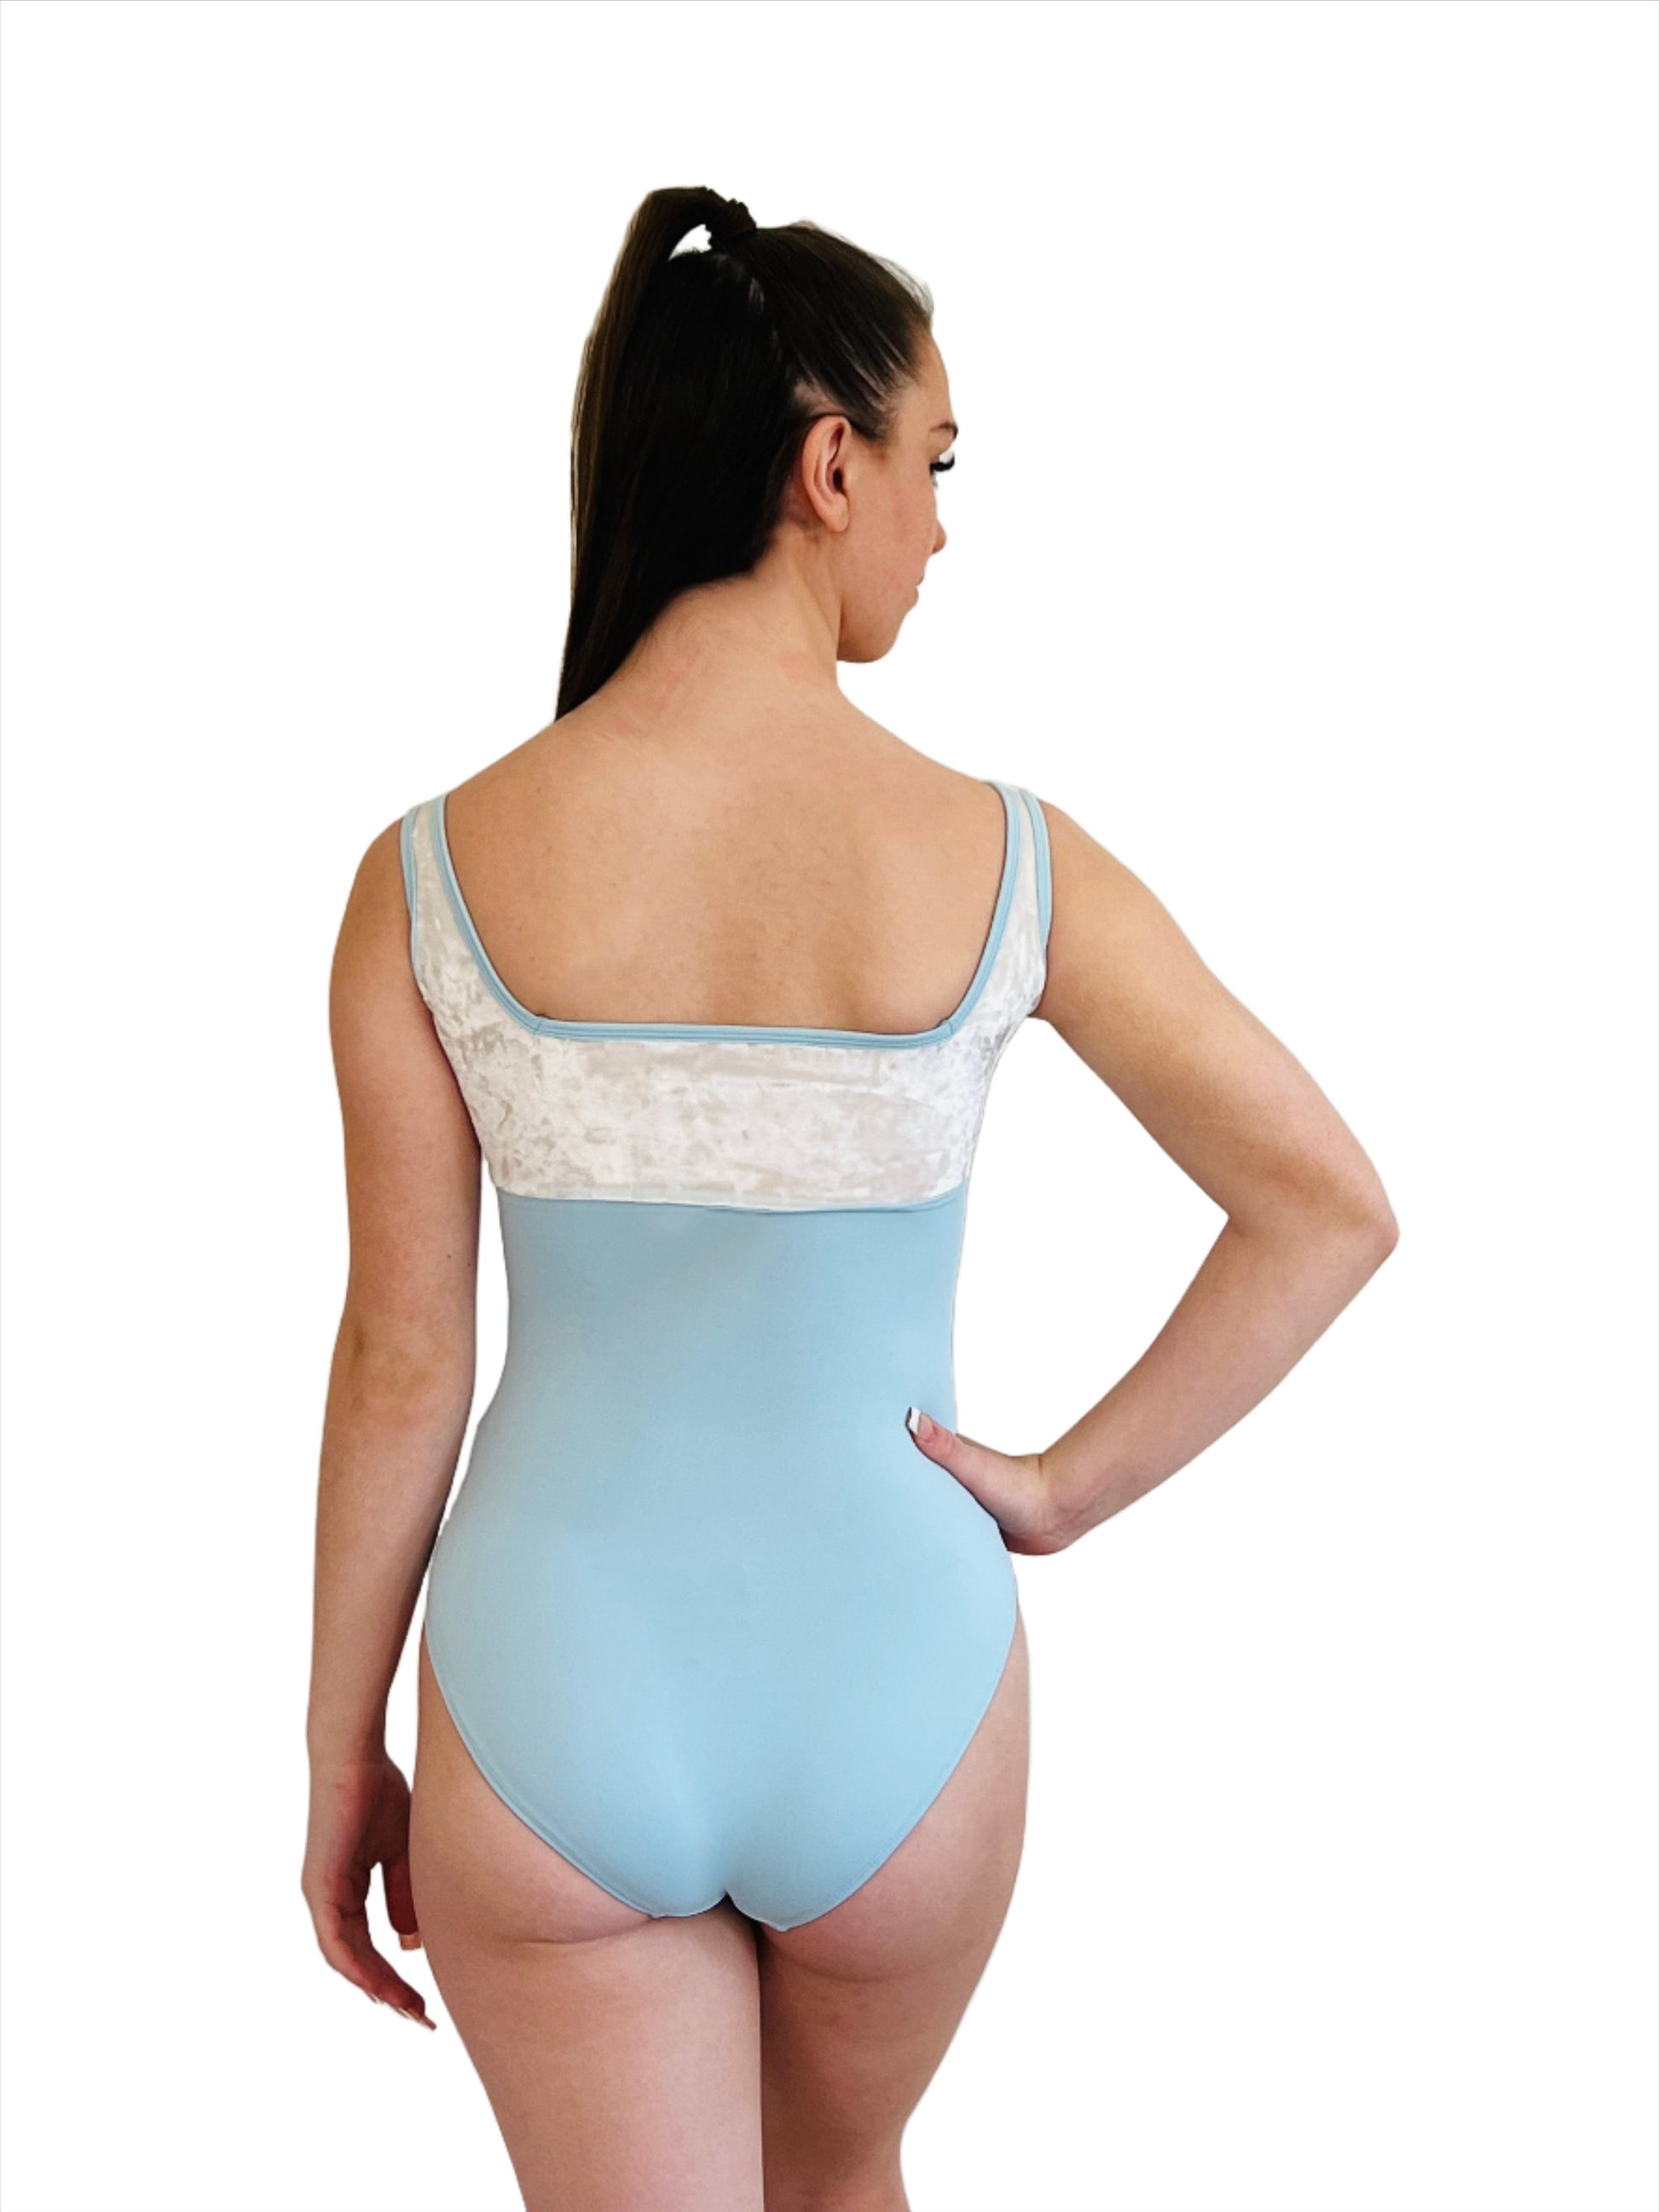 White and blue velour leotard. White velour from bust to straps. Pale blue lycra body. Square neck and blue lycra binding at neck and straps sold by The Collective Dancewear.